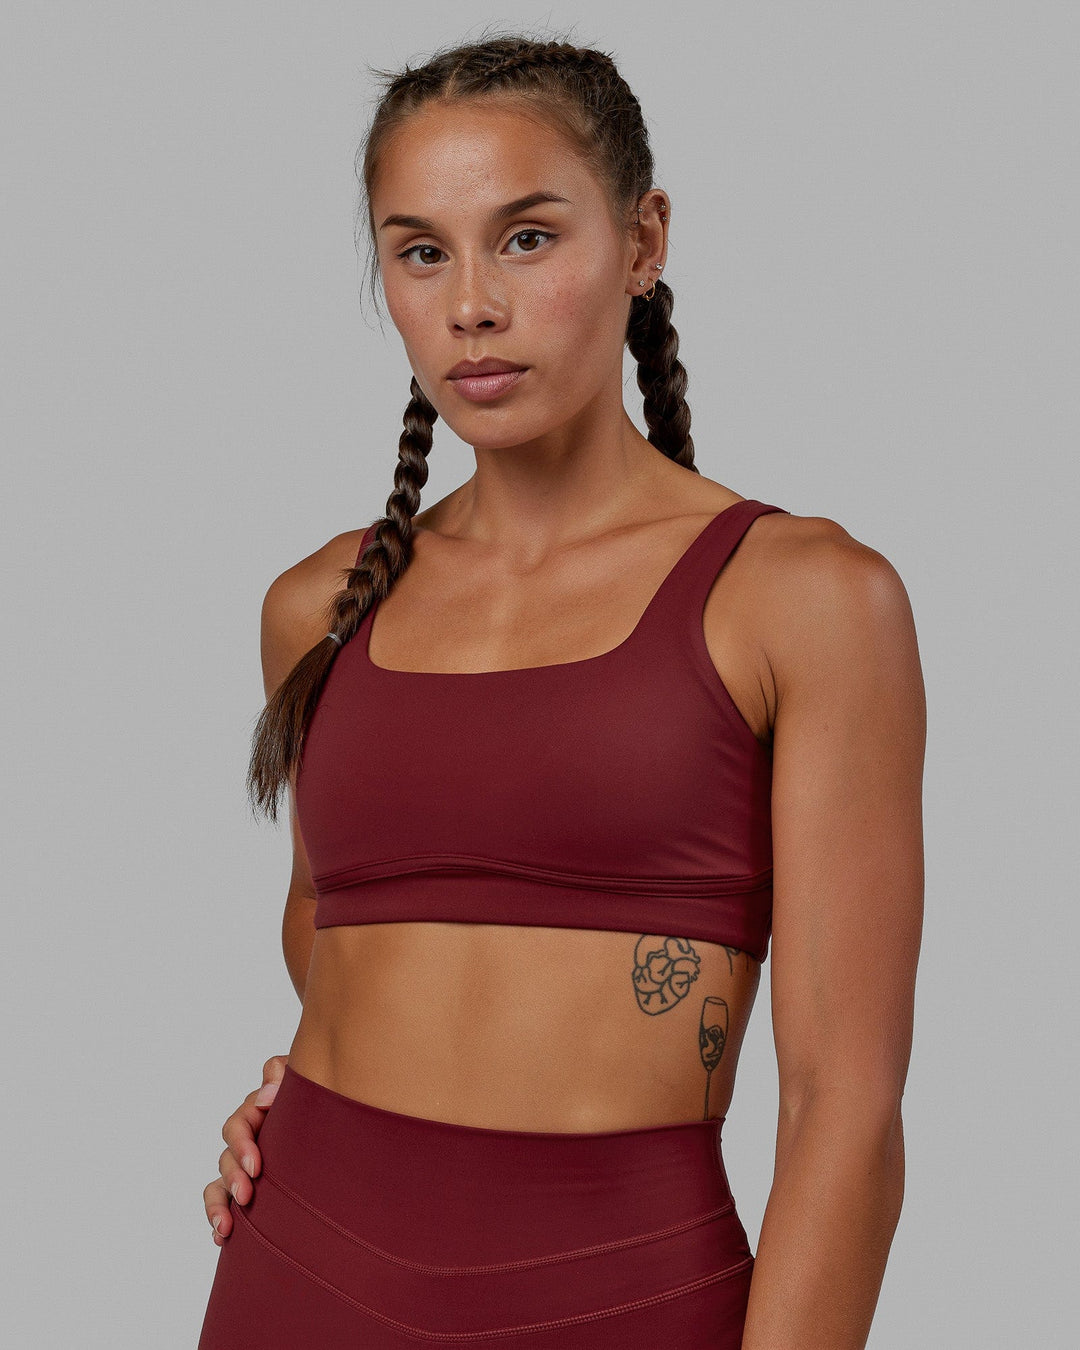 what are your thoughts on this new soft cranberry align tank? (saw